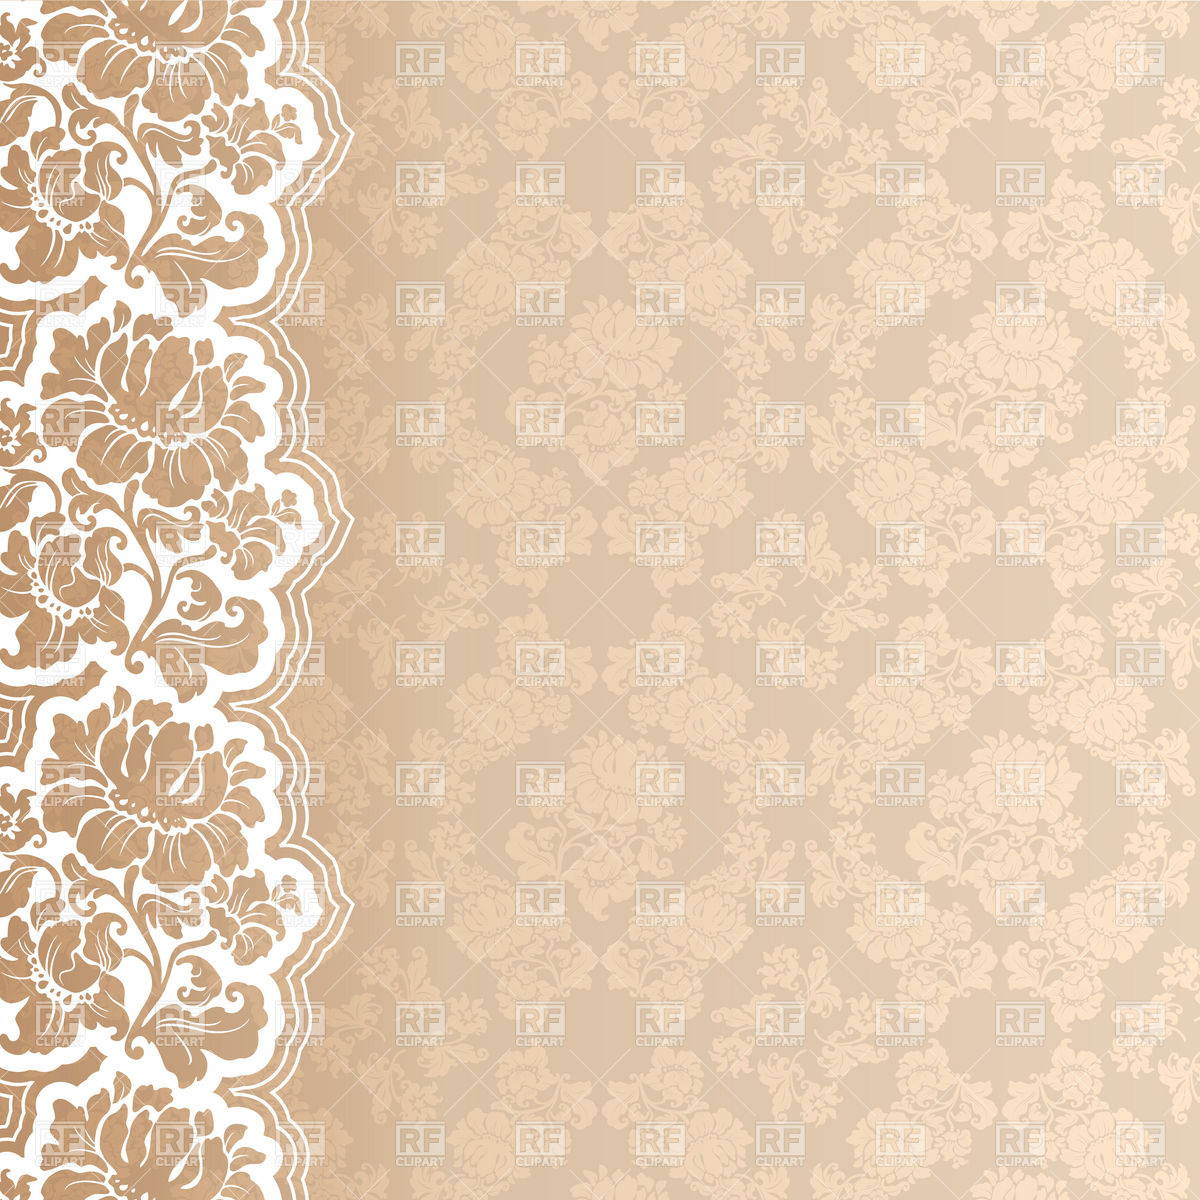 Floral victorian wallpaper with lace border 18741 Backgrounds